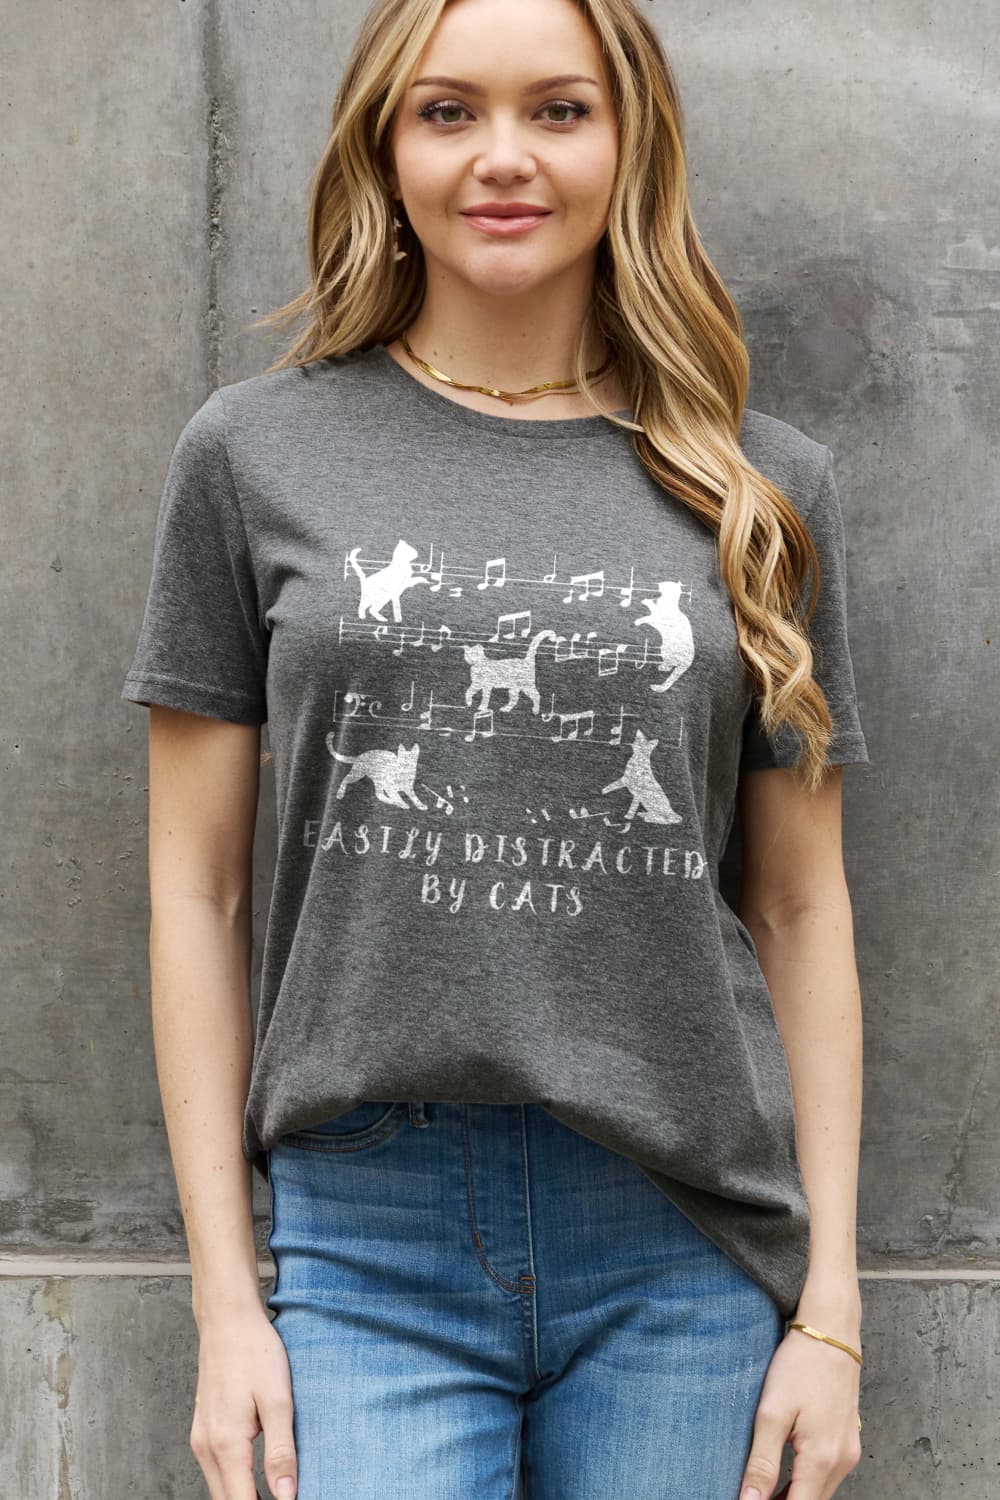 Simply Love Full Size Halloween EASILY DISTRACTED BY CATS Graphic Cotton Tee